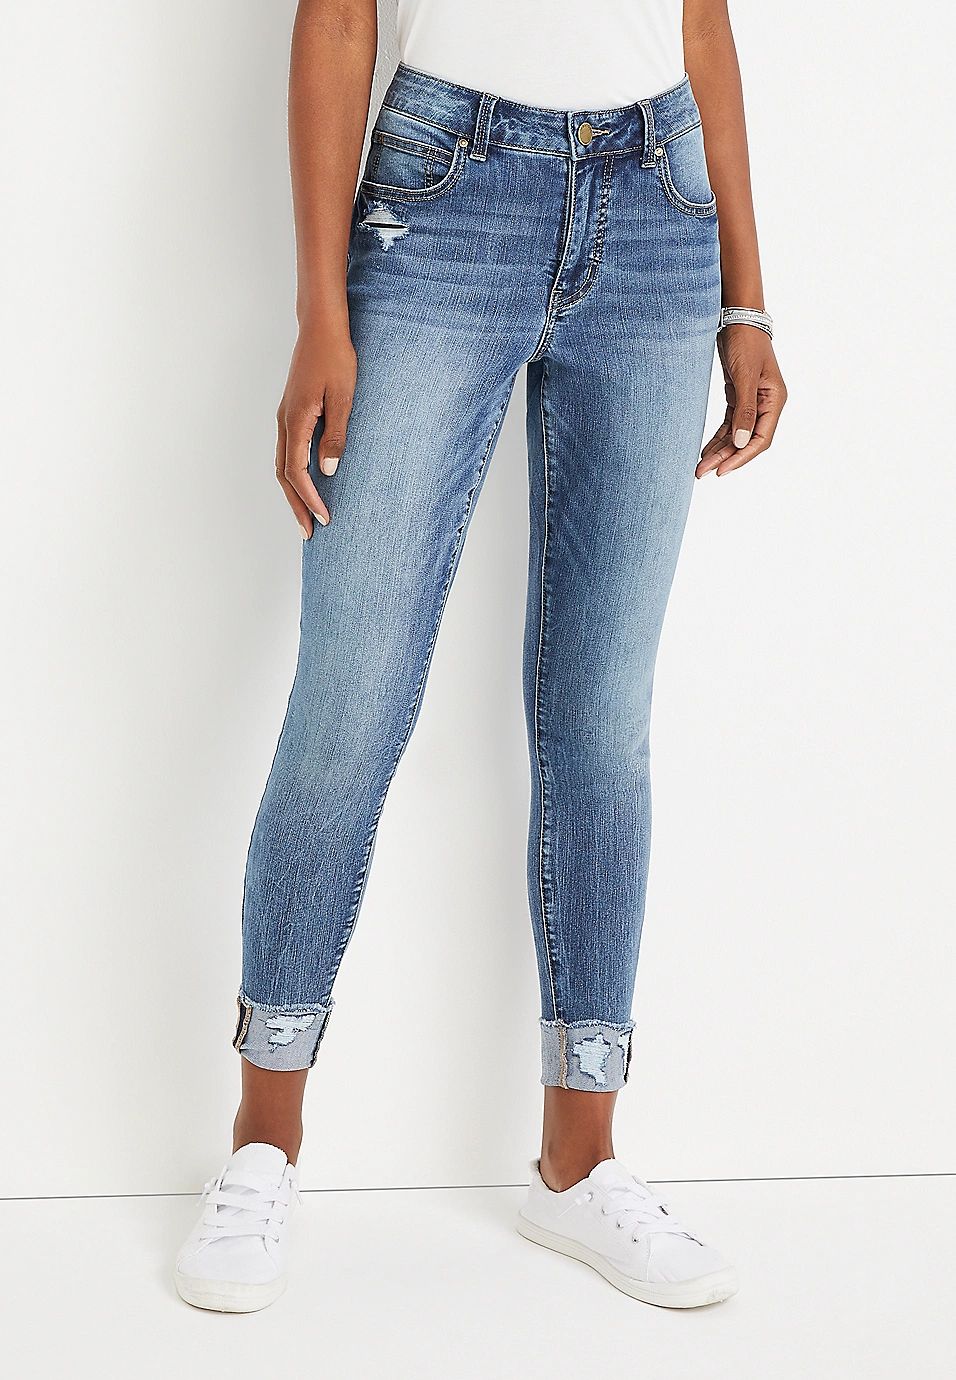 m jeans by maurices™ Everflex™ Super Skinny Ankle Curvy High Rise Cuffed Jean | Maurices